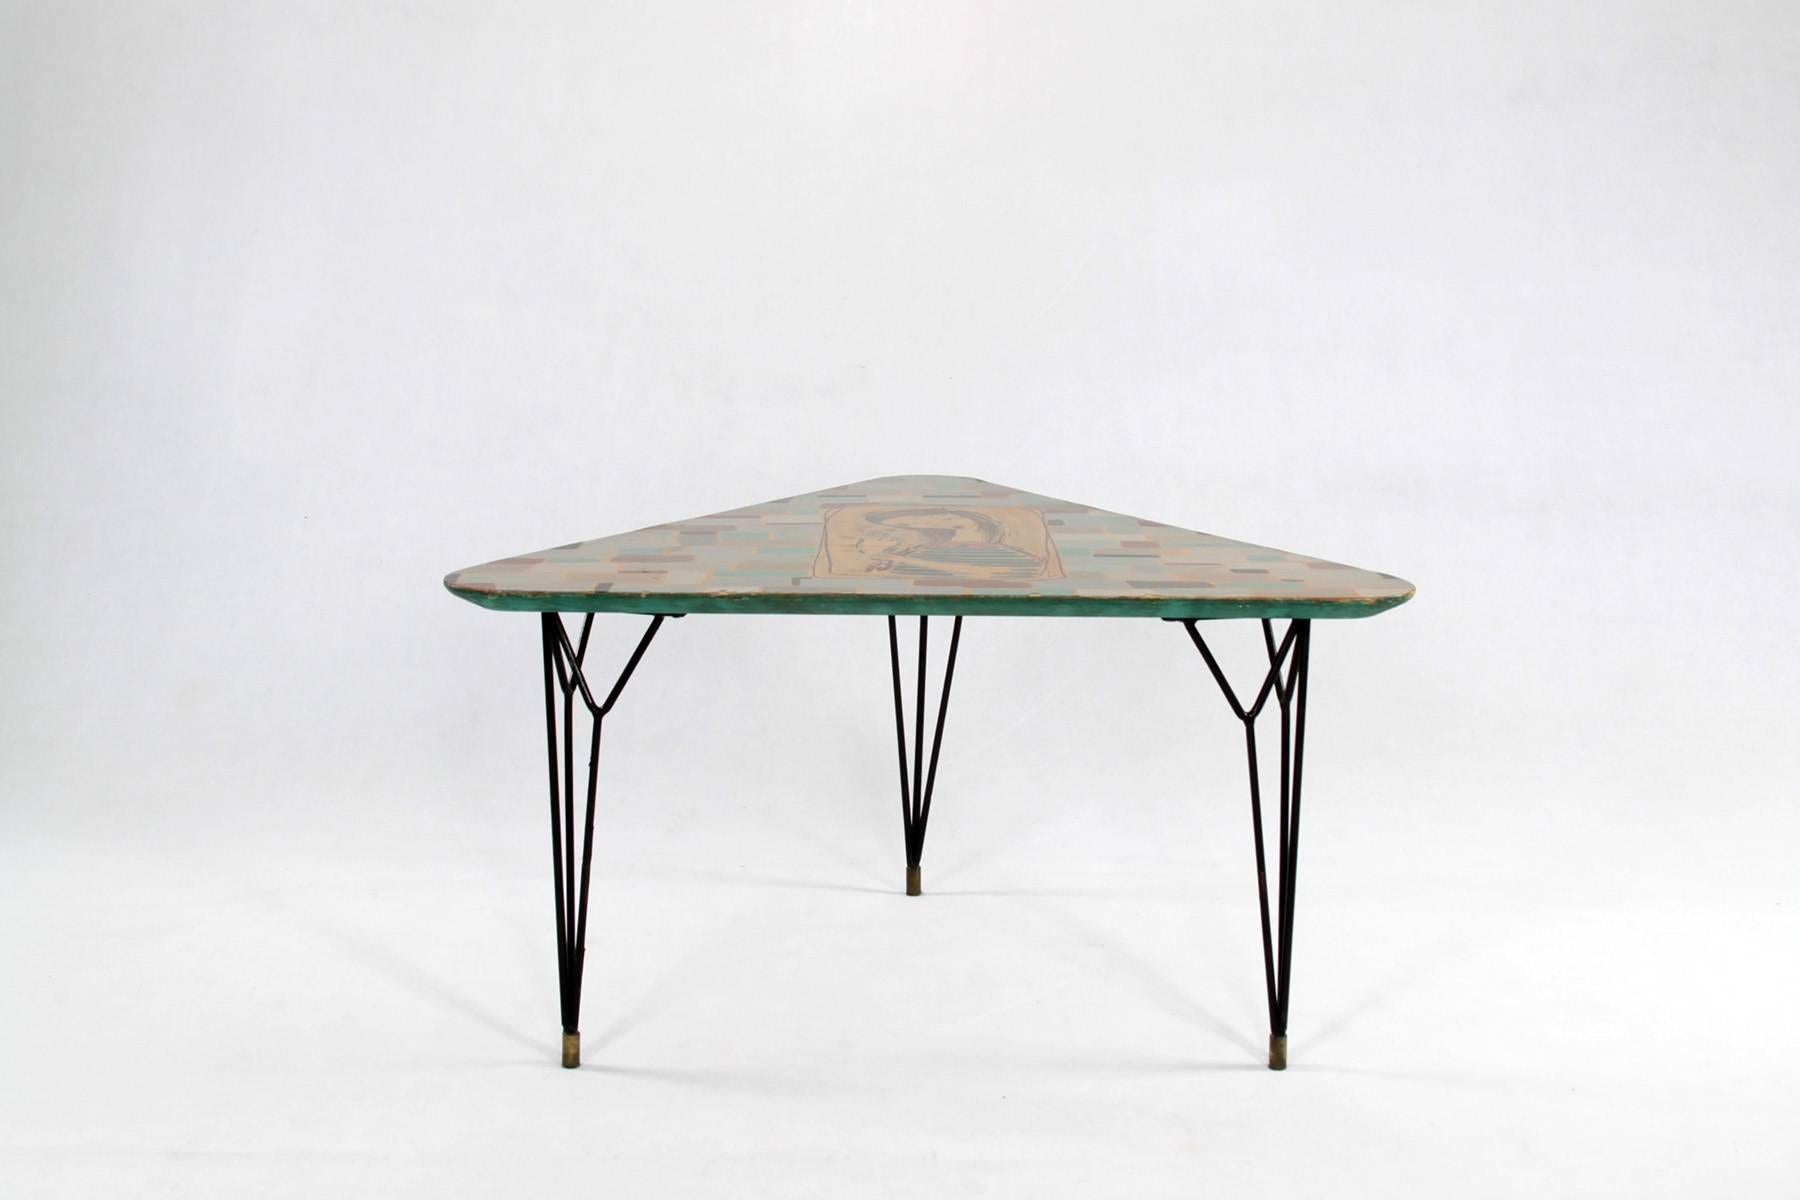 Hand-painted triangular Italian coffee table from 1950s